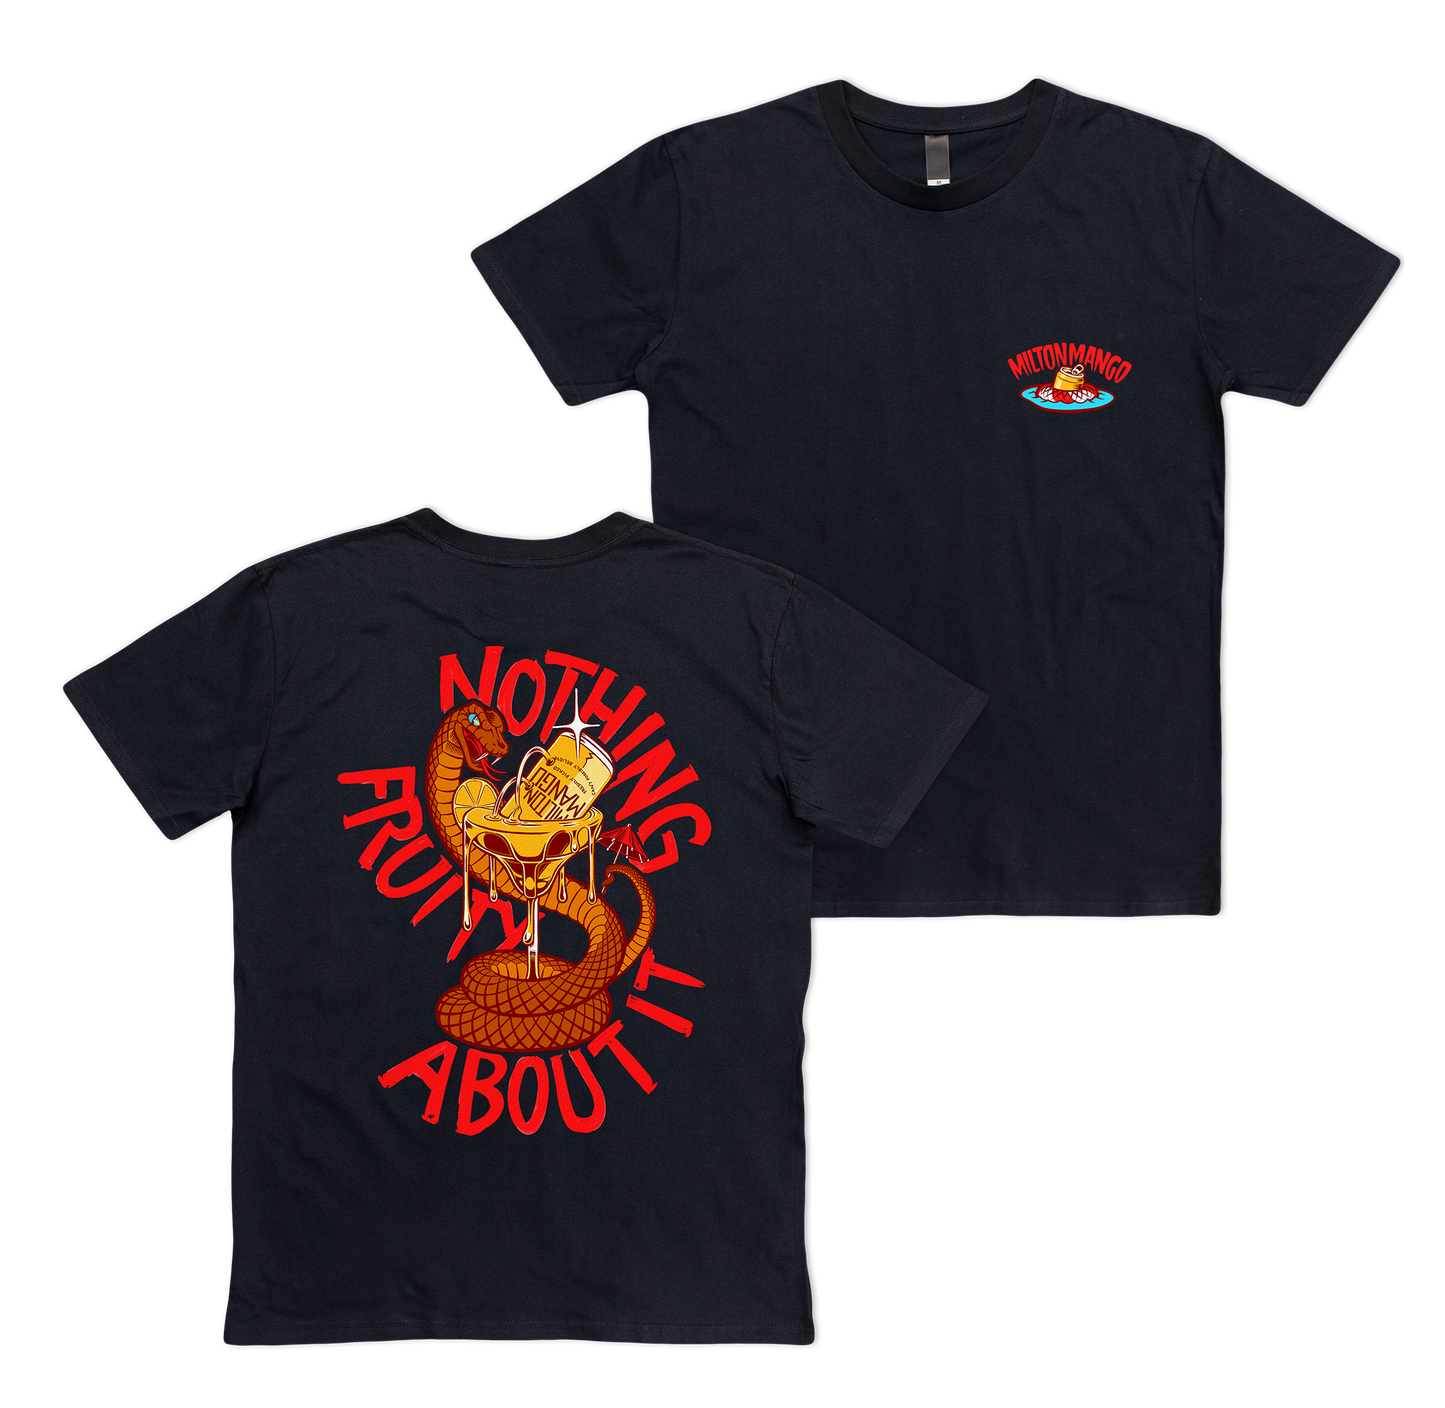 Nothin' Fruity About It Tee Black